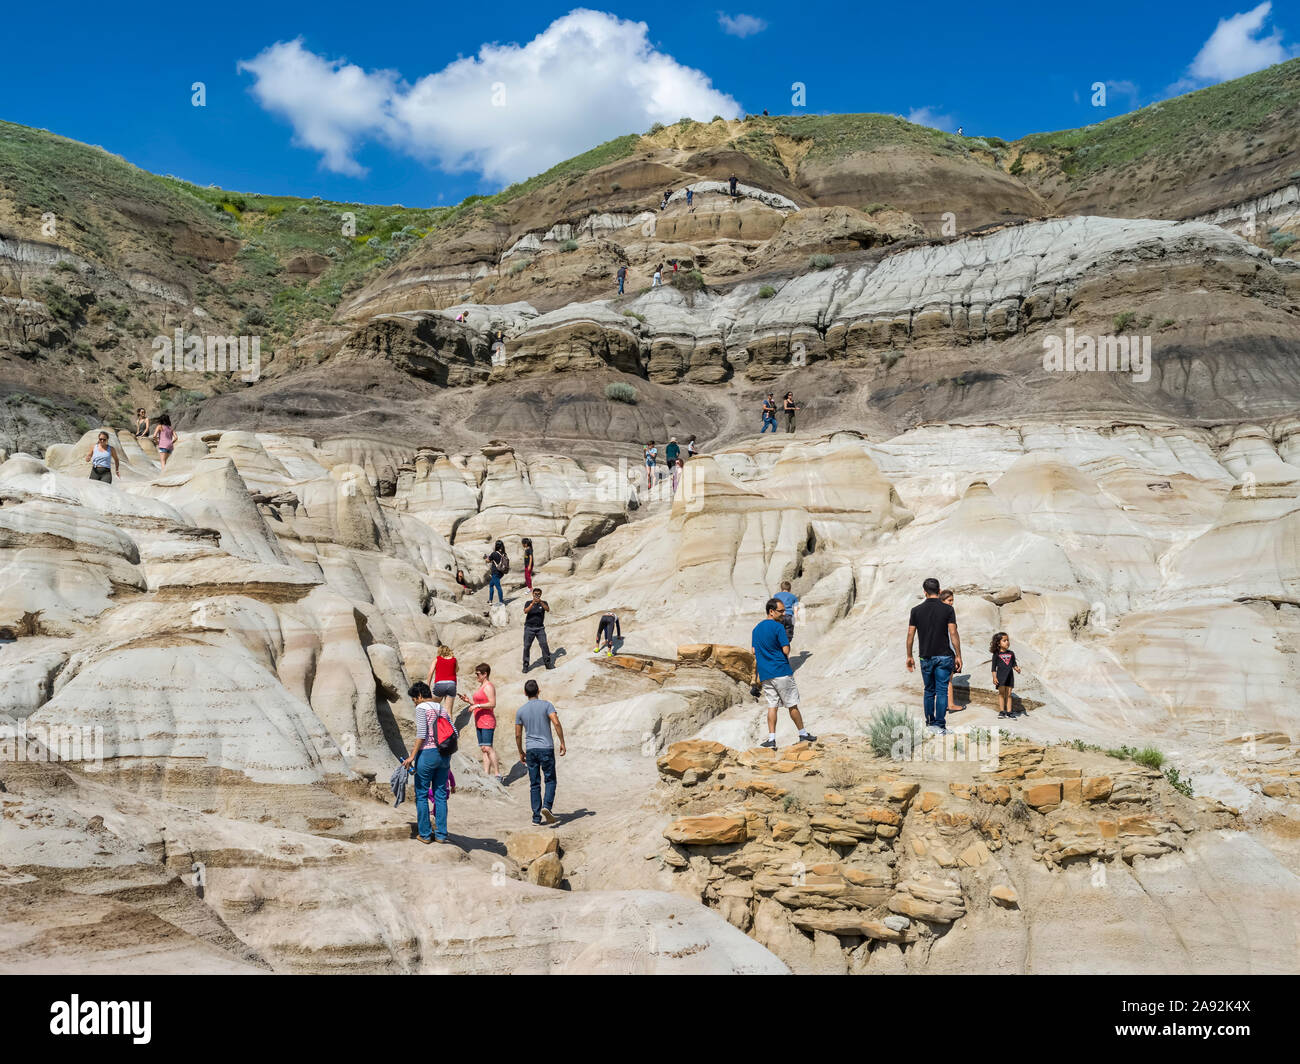 Tourists on Hoodoos Trail in the Canadian Badlands. Each hoodoo is a sandstone pillar resting on a thick base of shale that is capped by a large stone Stock Photo